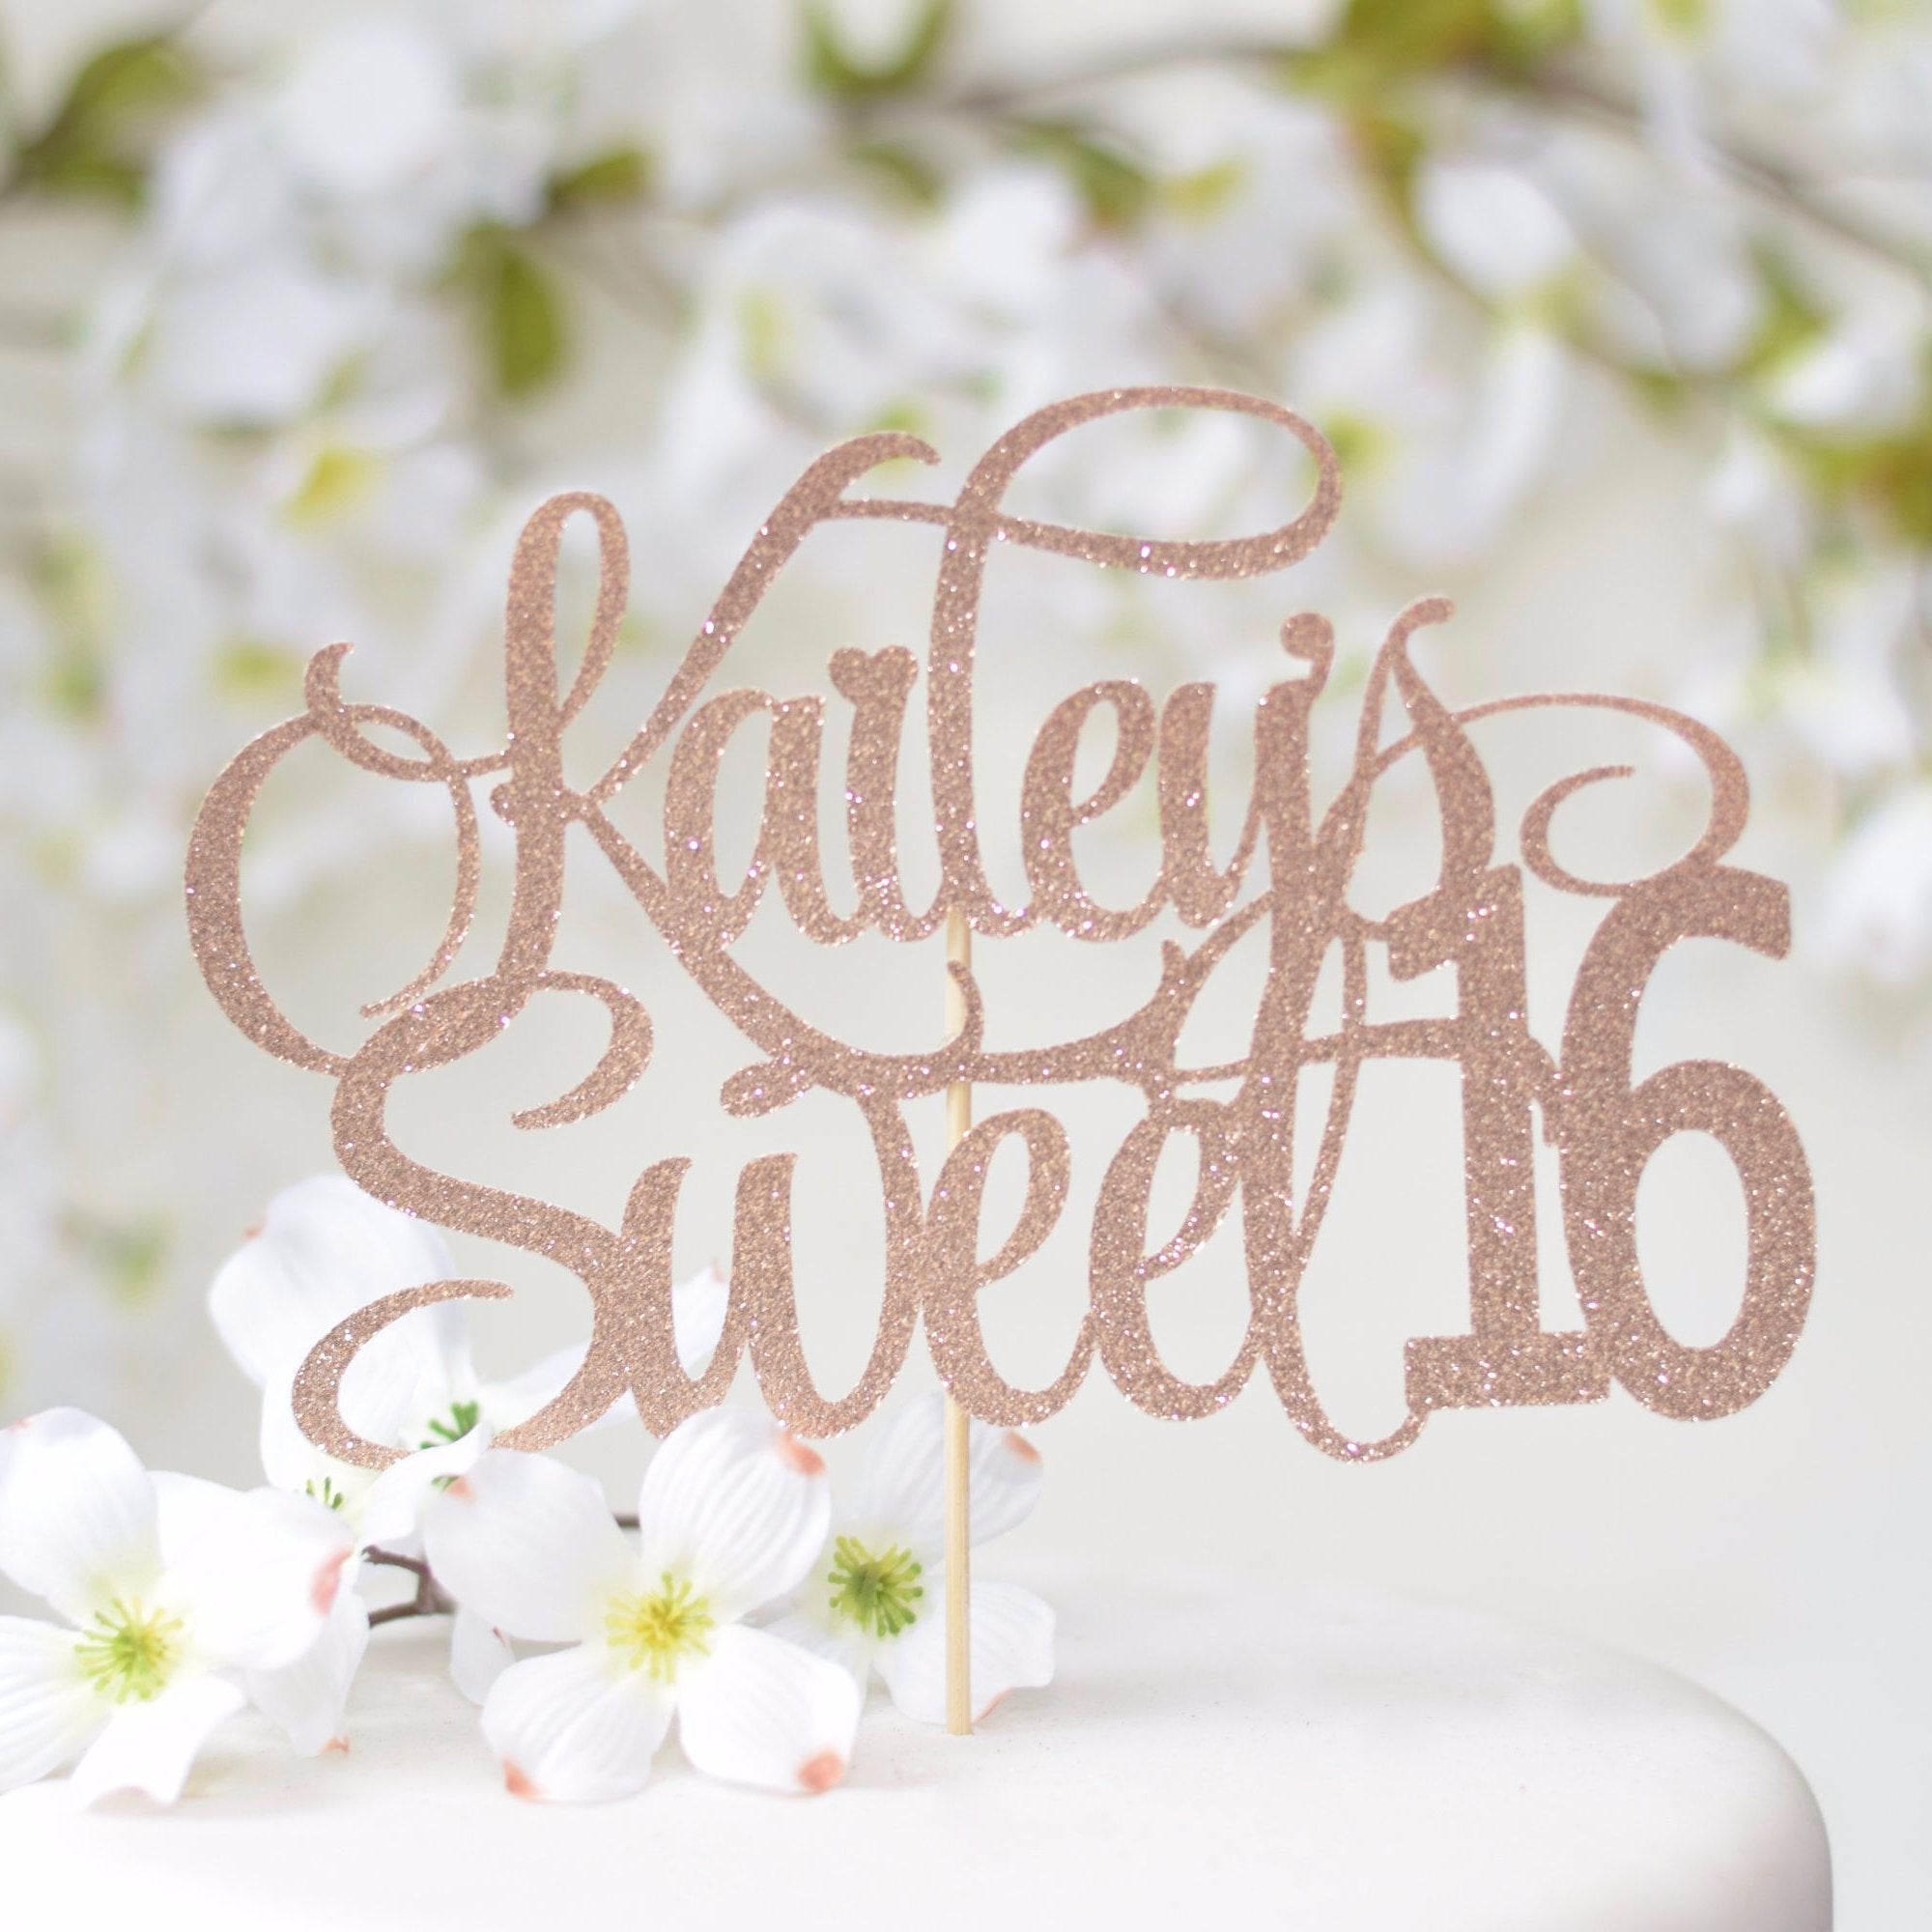 Turning 16? Celebrate with a Sweet 16 Birthday Cake Topper Decoration!